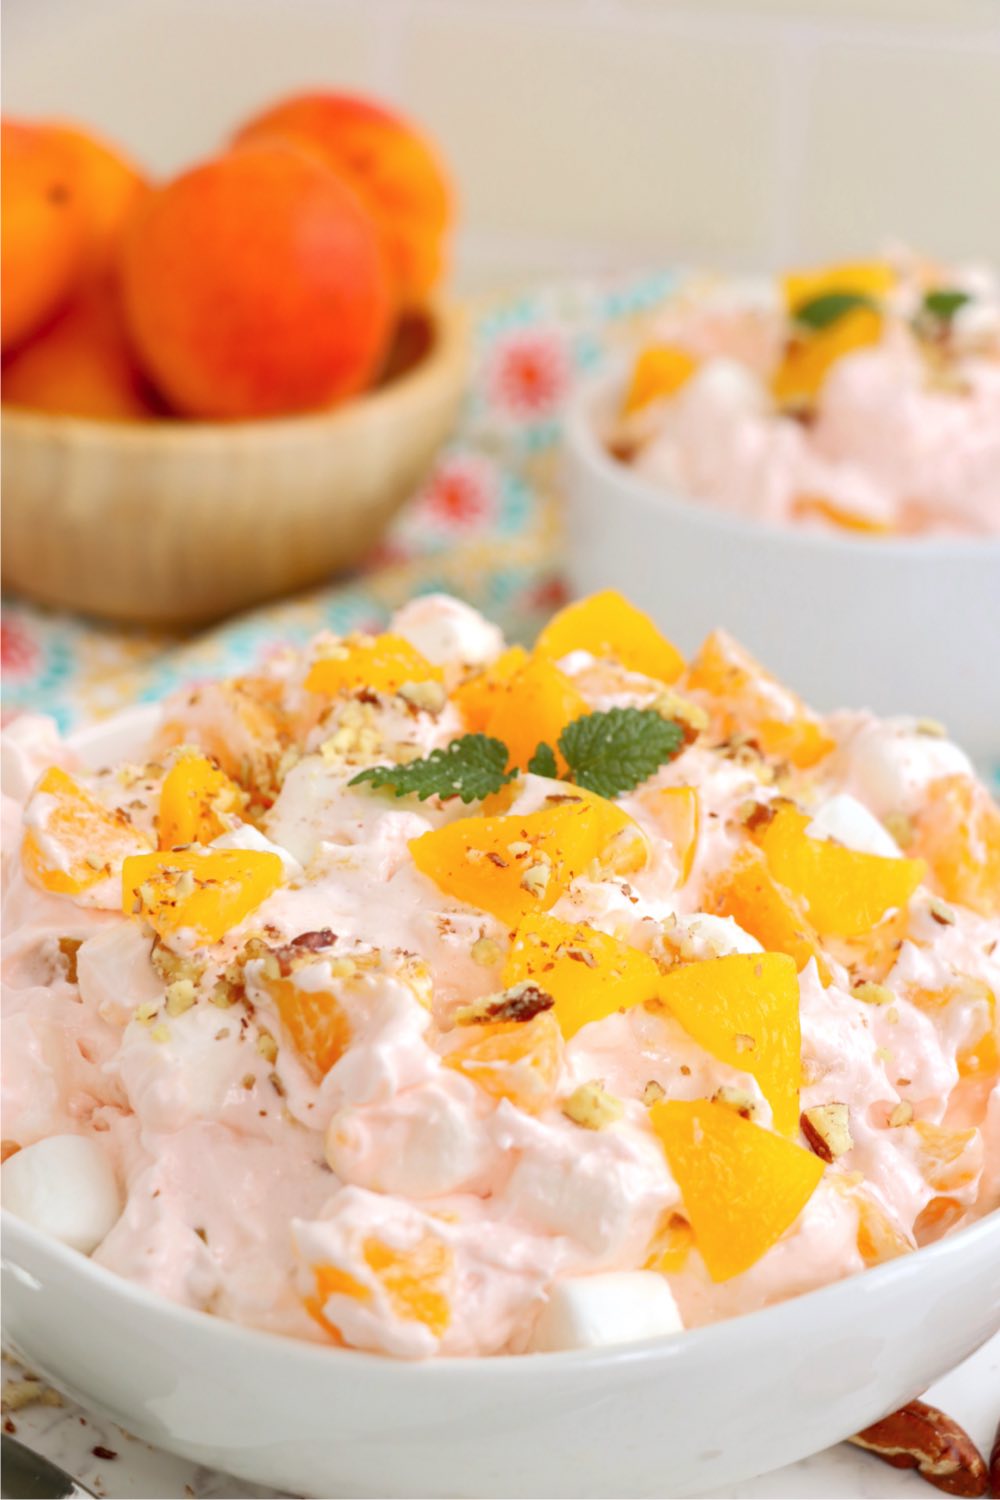 Fluffy jello salad in a bowl garnished with peaches and a mint leaf.